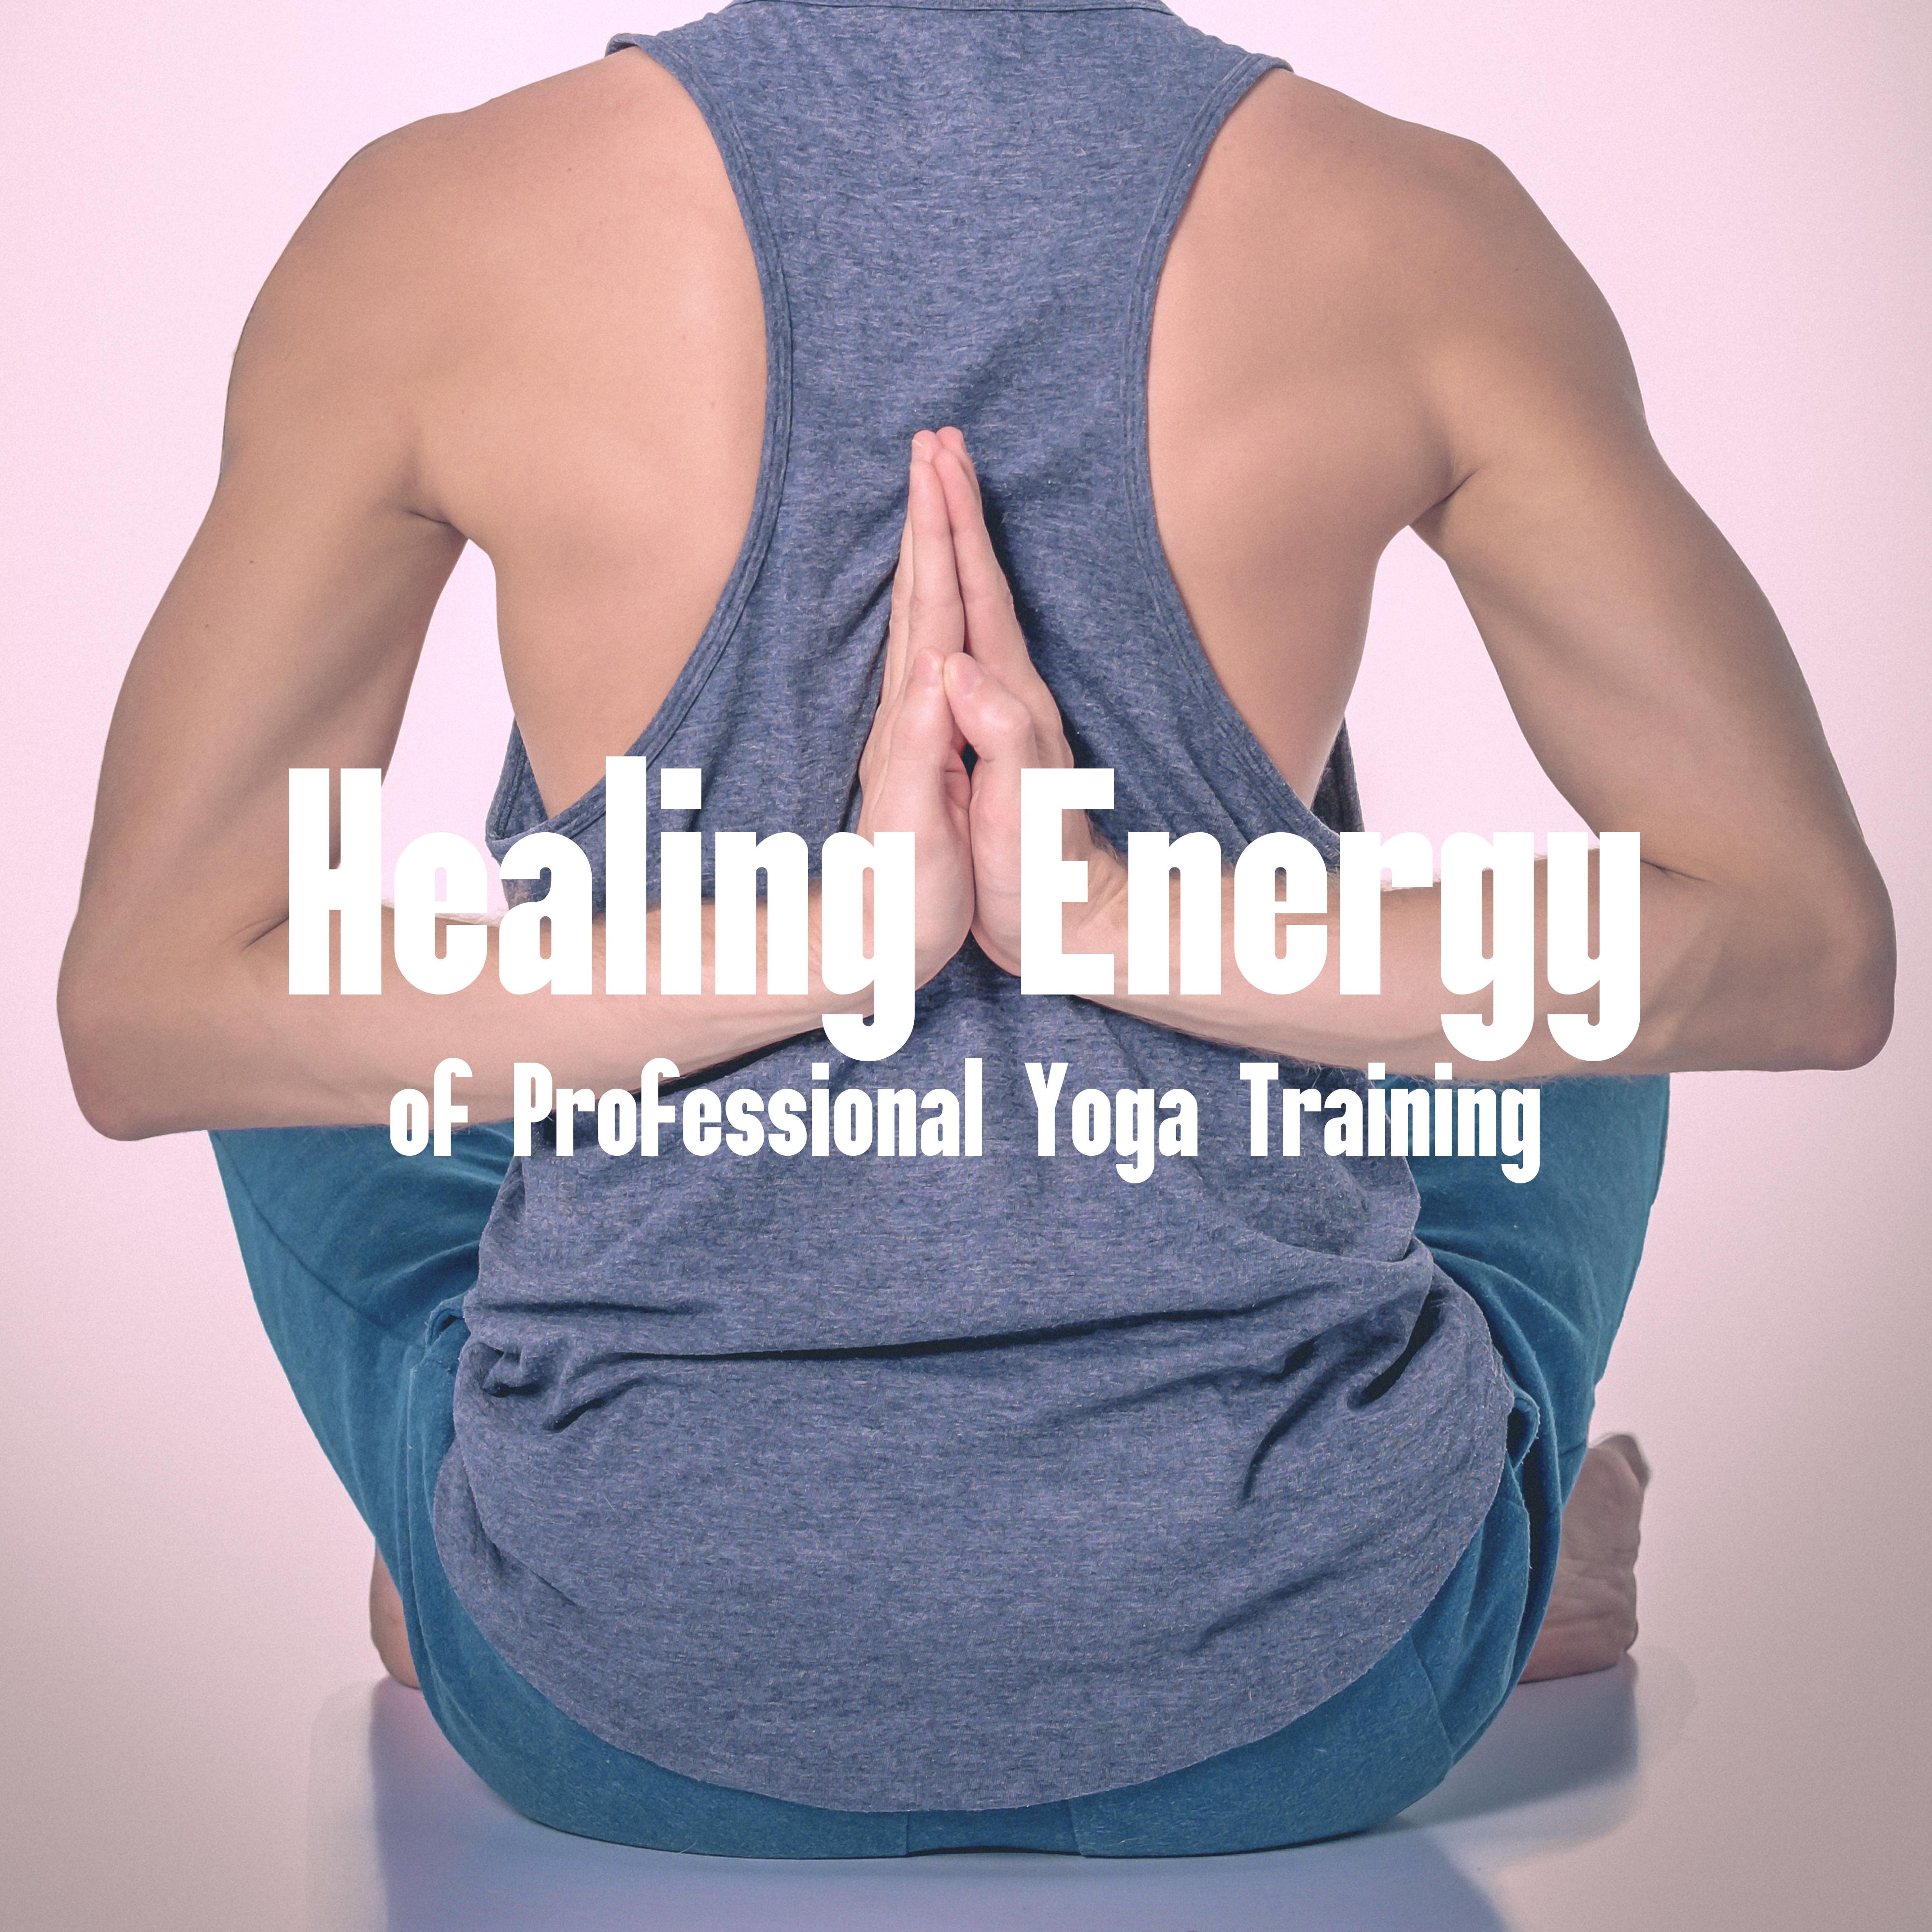 Healing Energy of Professional Yoga Training: 2019 New Age Music for Meditation & Relaxation, Train Your Body & Mind, Chakras Opening, Increase Vital Energy